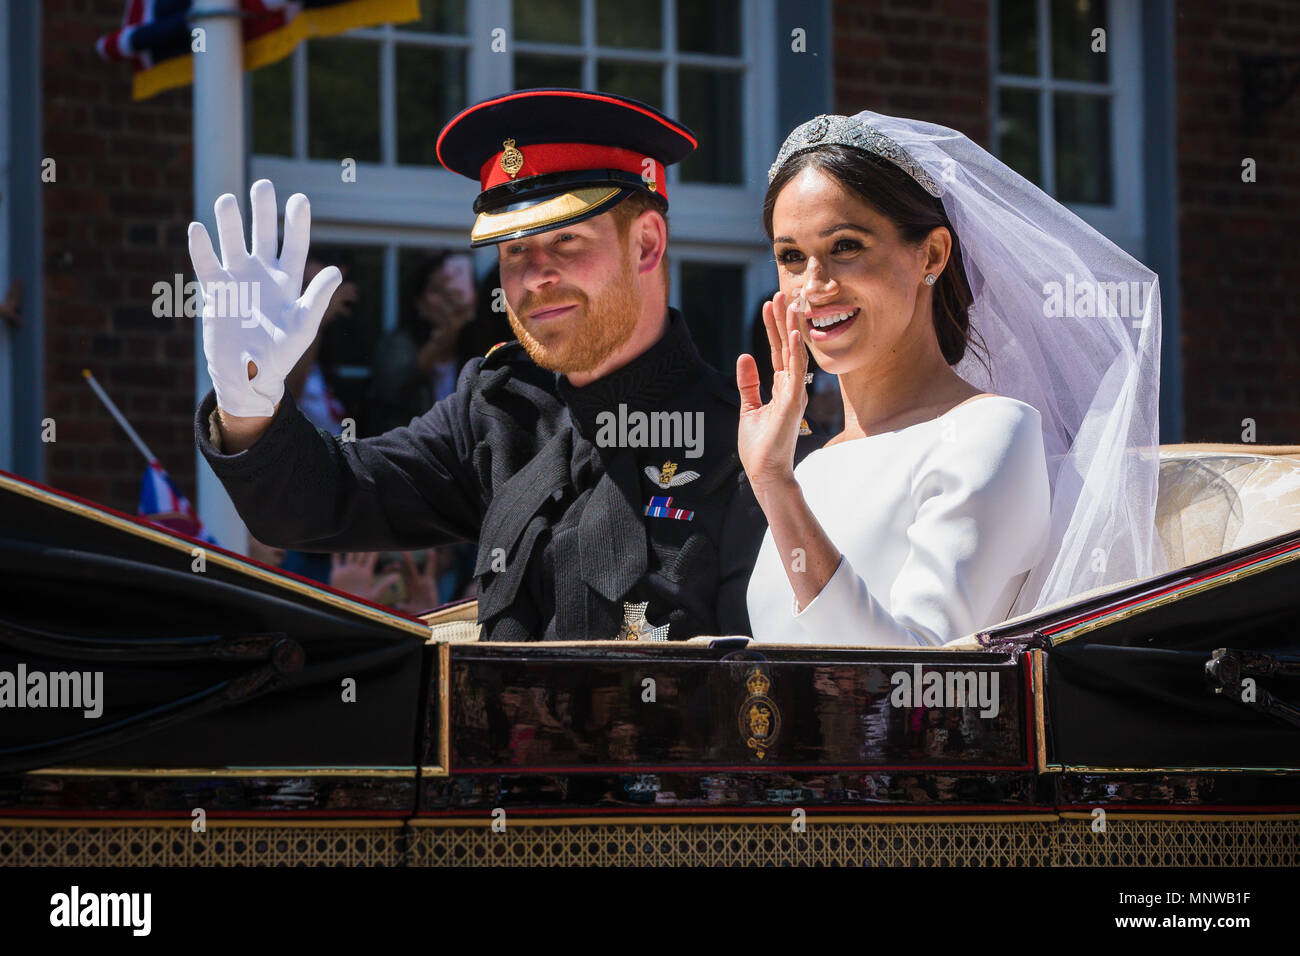 Windsor, UK, 19 May 2018. Prince Harry and his bride Meghan Markle ride around the streets of Windsor in a state Landau greeted by huge crowds cheering and waving flags following their wedding at St Georges Chapel. Before heading back to Windsor castle for their wedding reception. They will now be know as The Duke and Duchess of Sussex Stock Photo